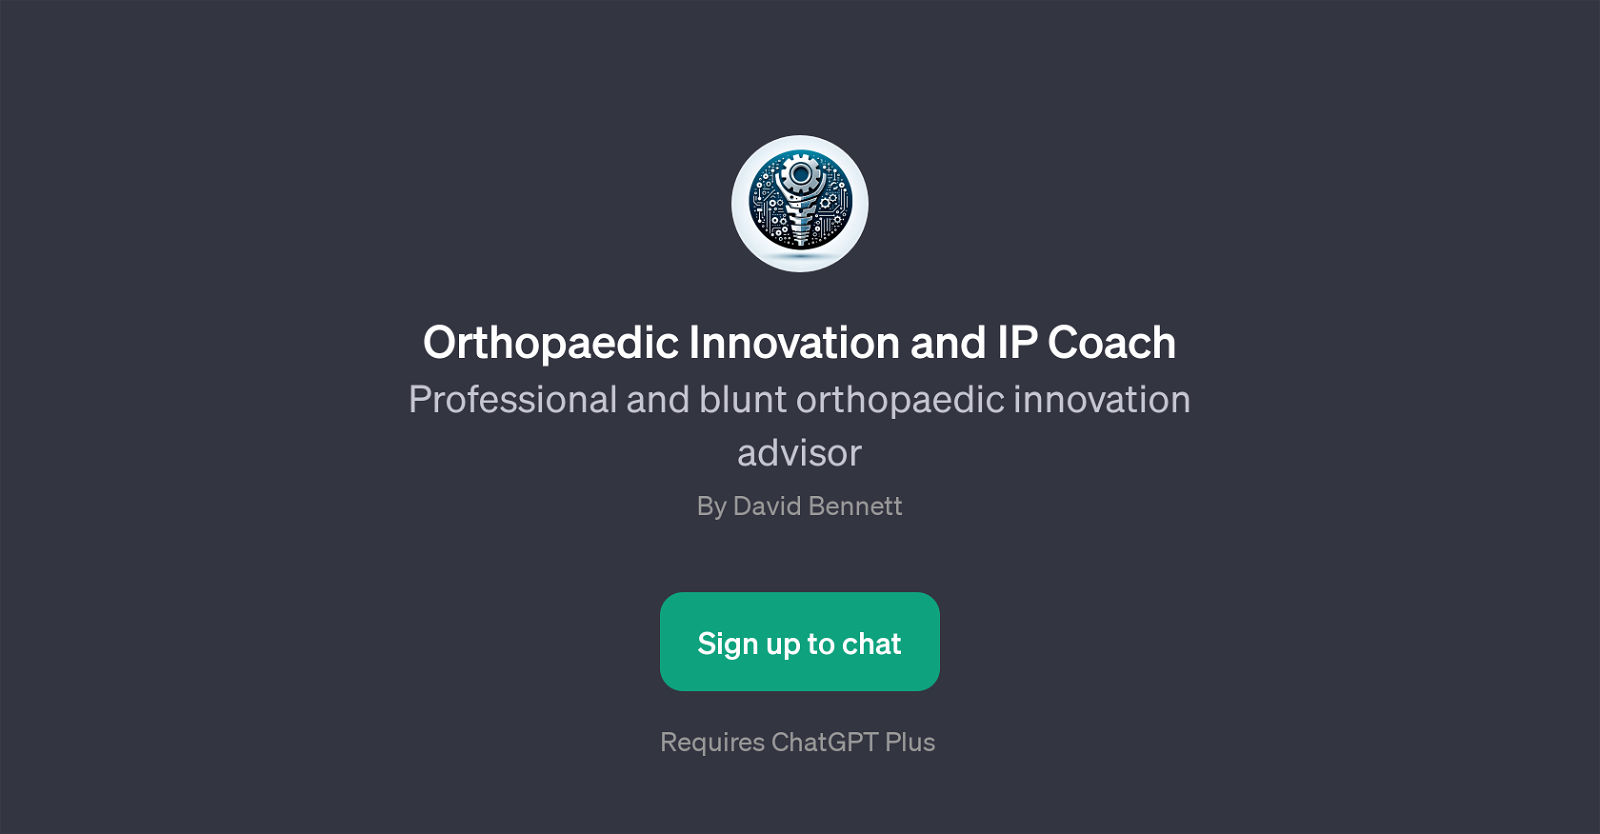 Orthopaedic Innovation and IP Coach website